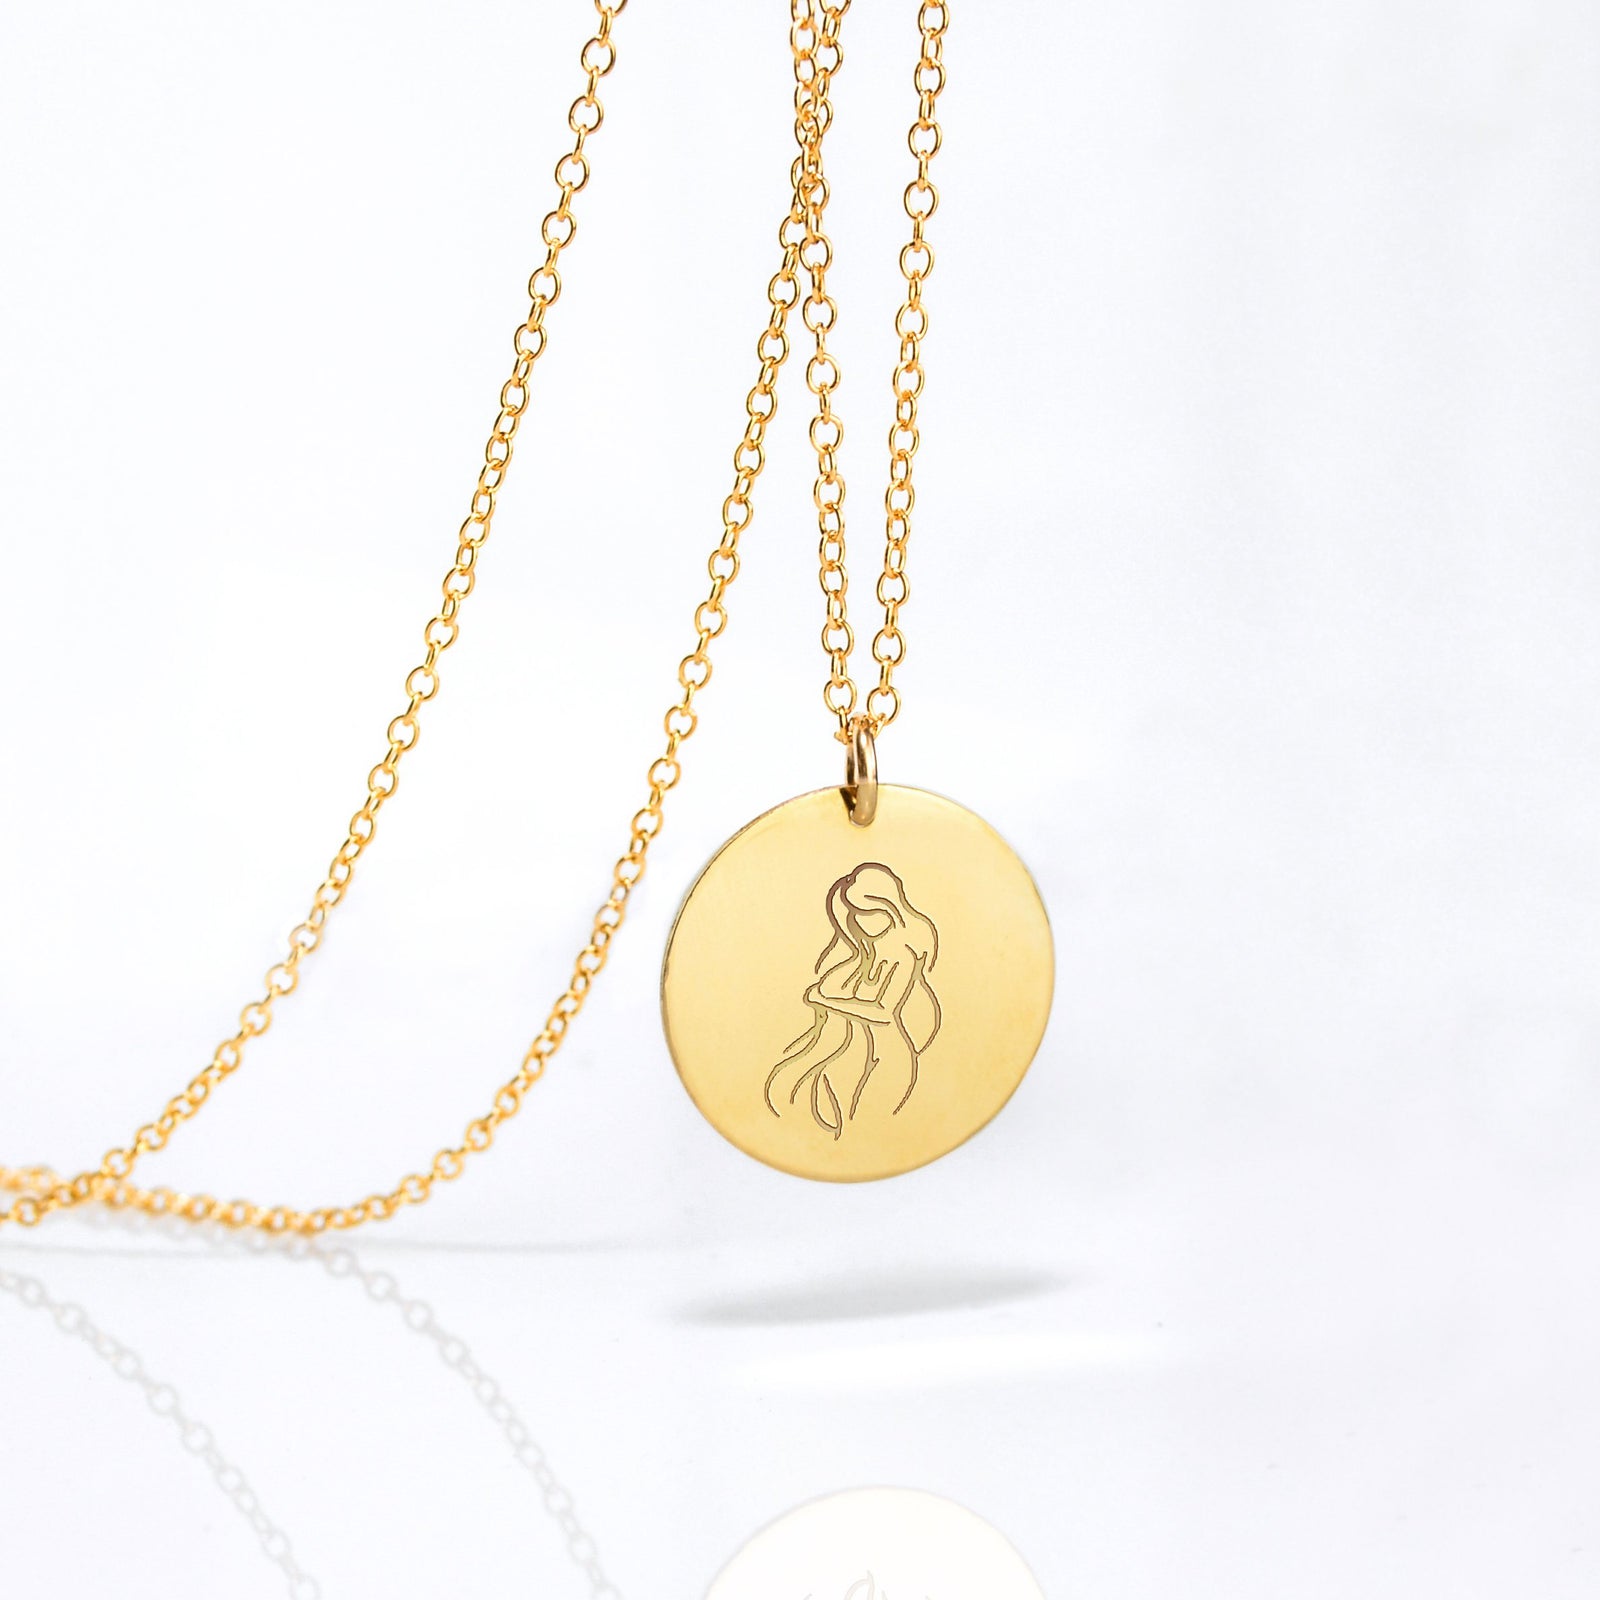 Simple Necklace Chain - Cable or Satellite 14K Gold-Filled / Cable Chain / 22 Inches / 55 cm